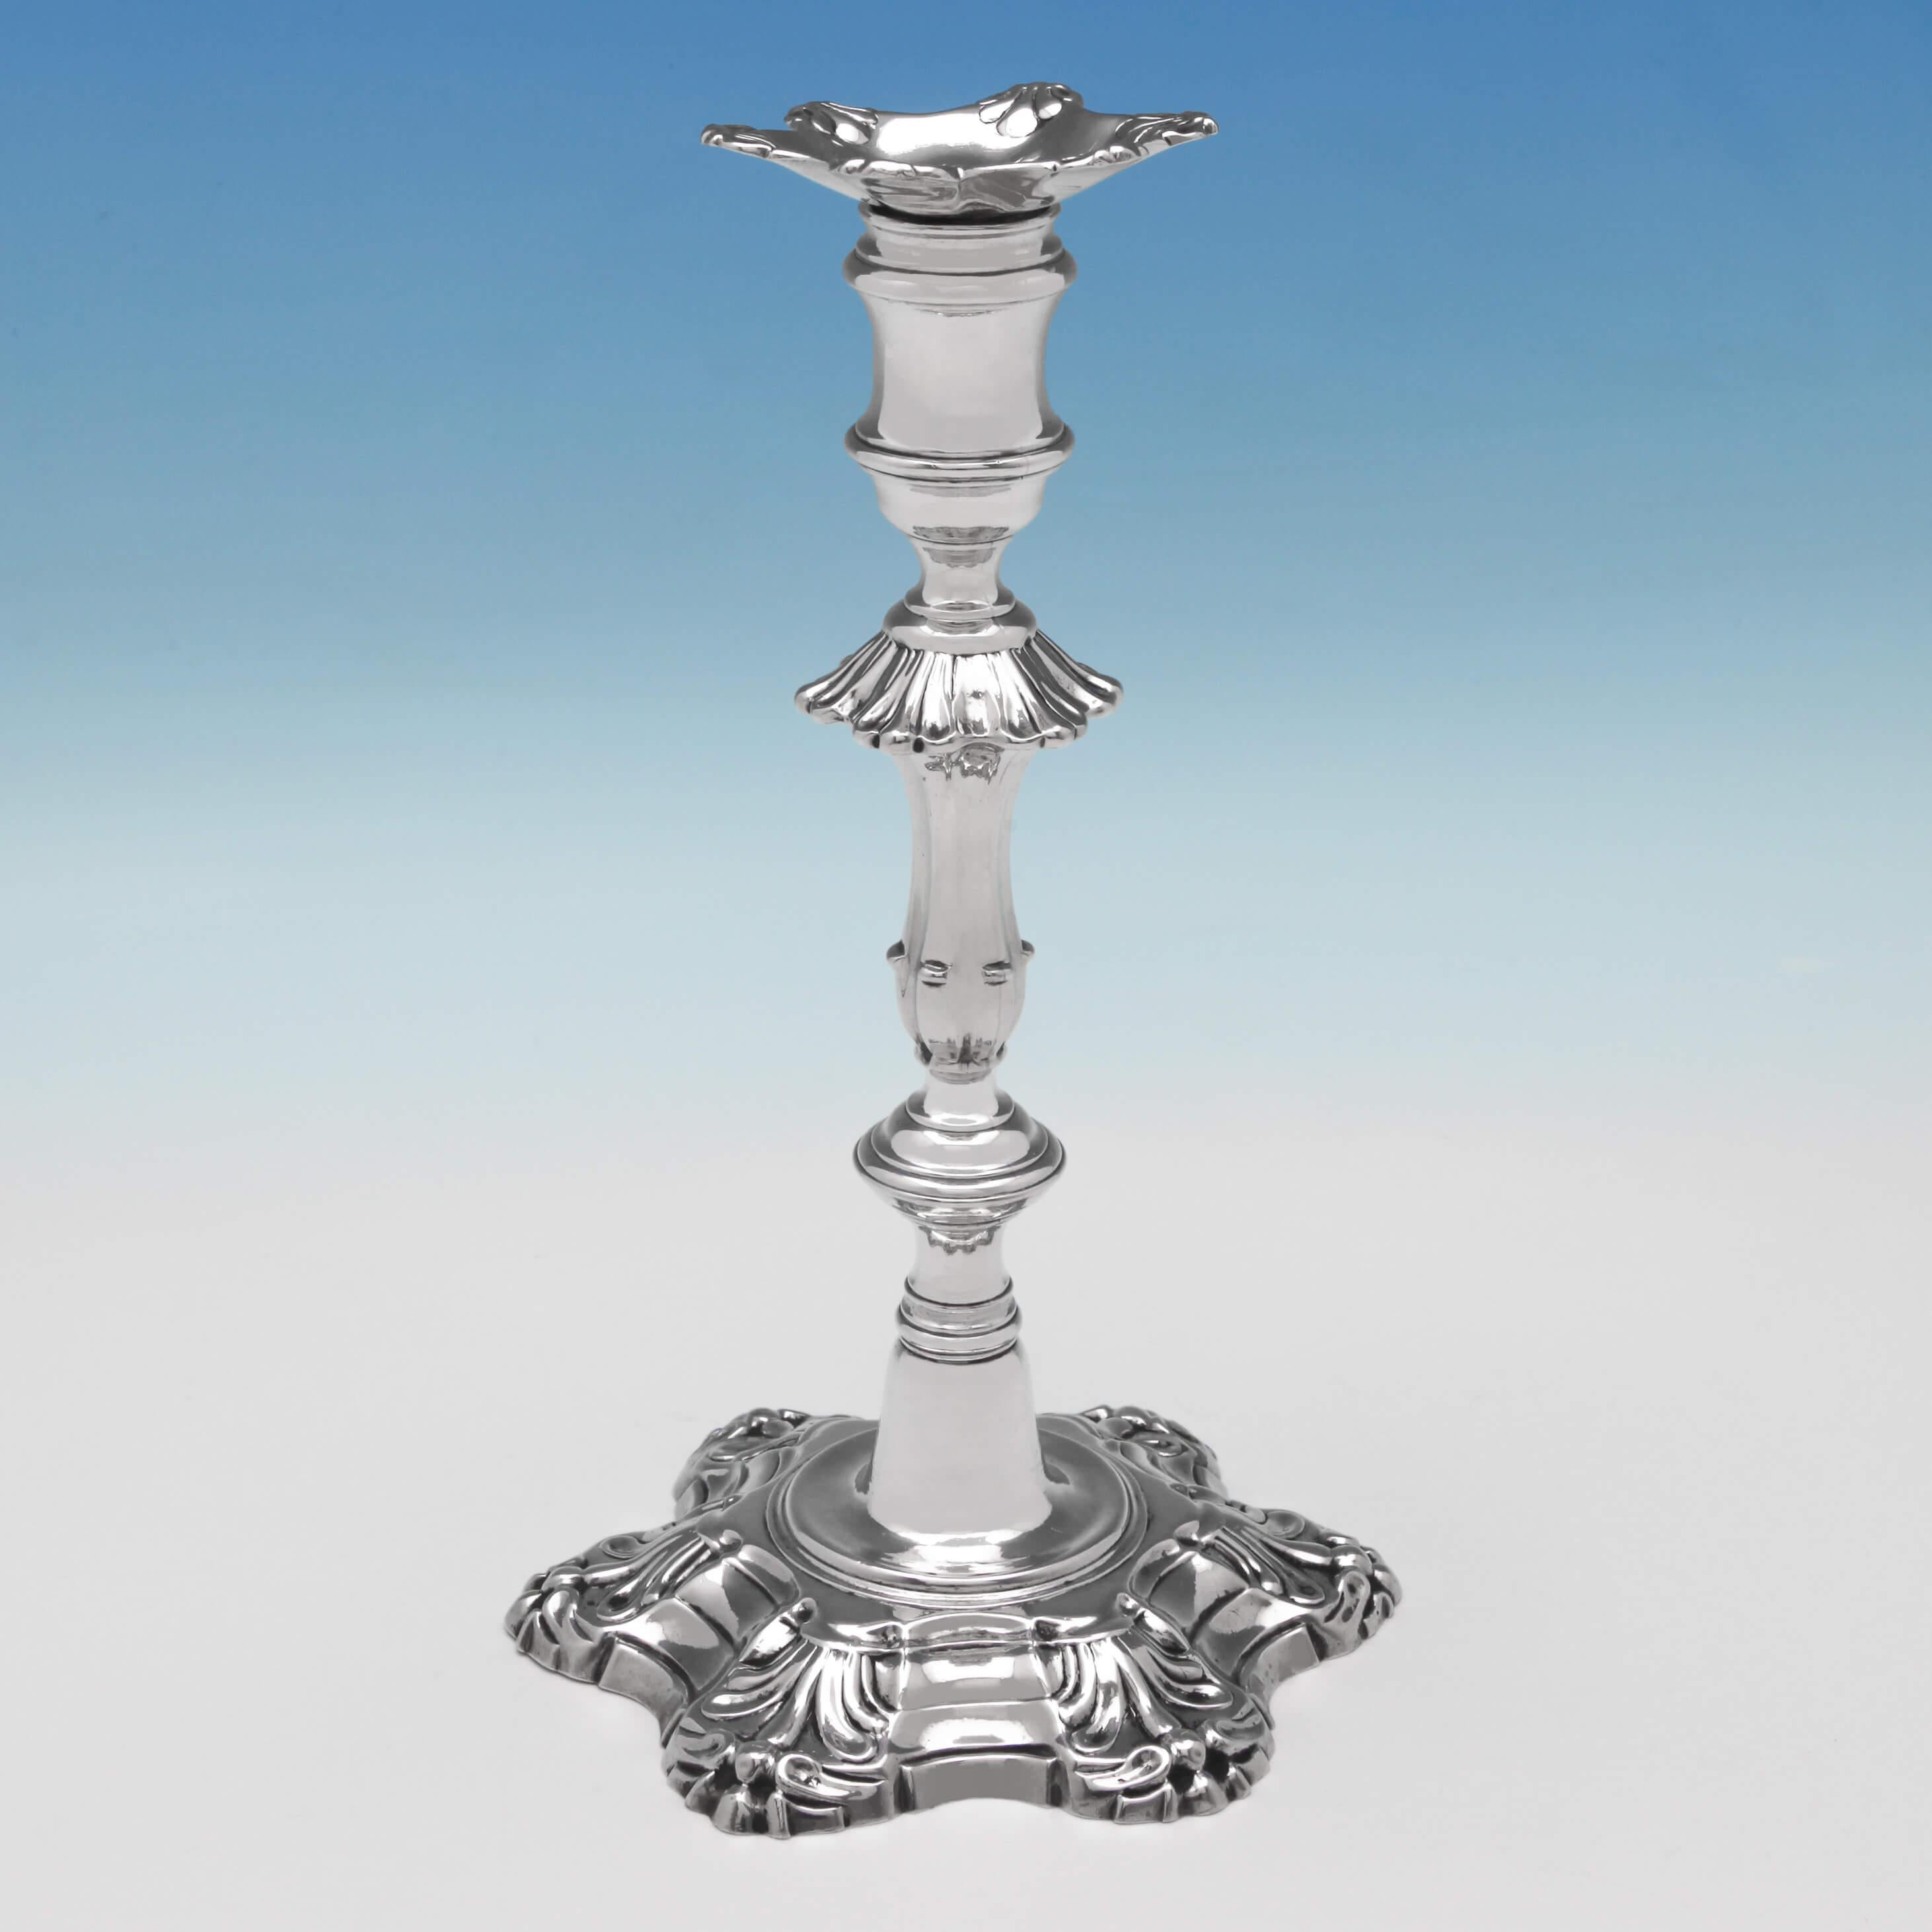 Hallmarked in London in 1756 by J. Priest, this magnificent pair of George II, antique, sterling silver candlesticks, are in the 